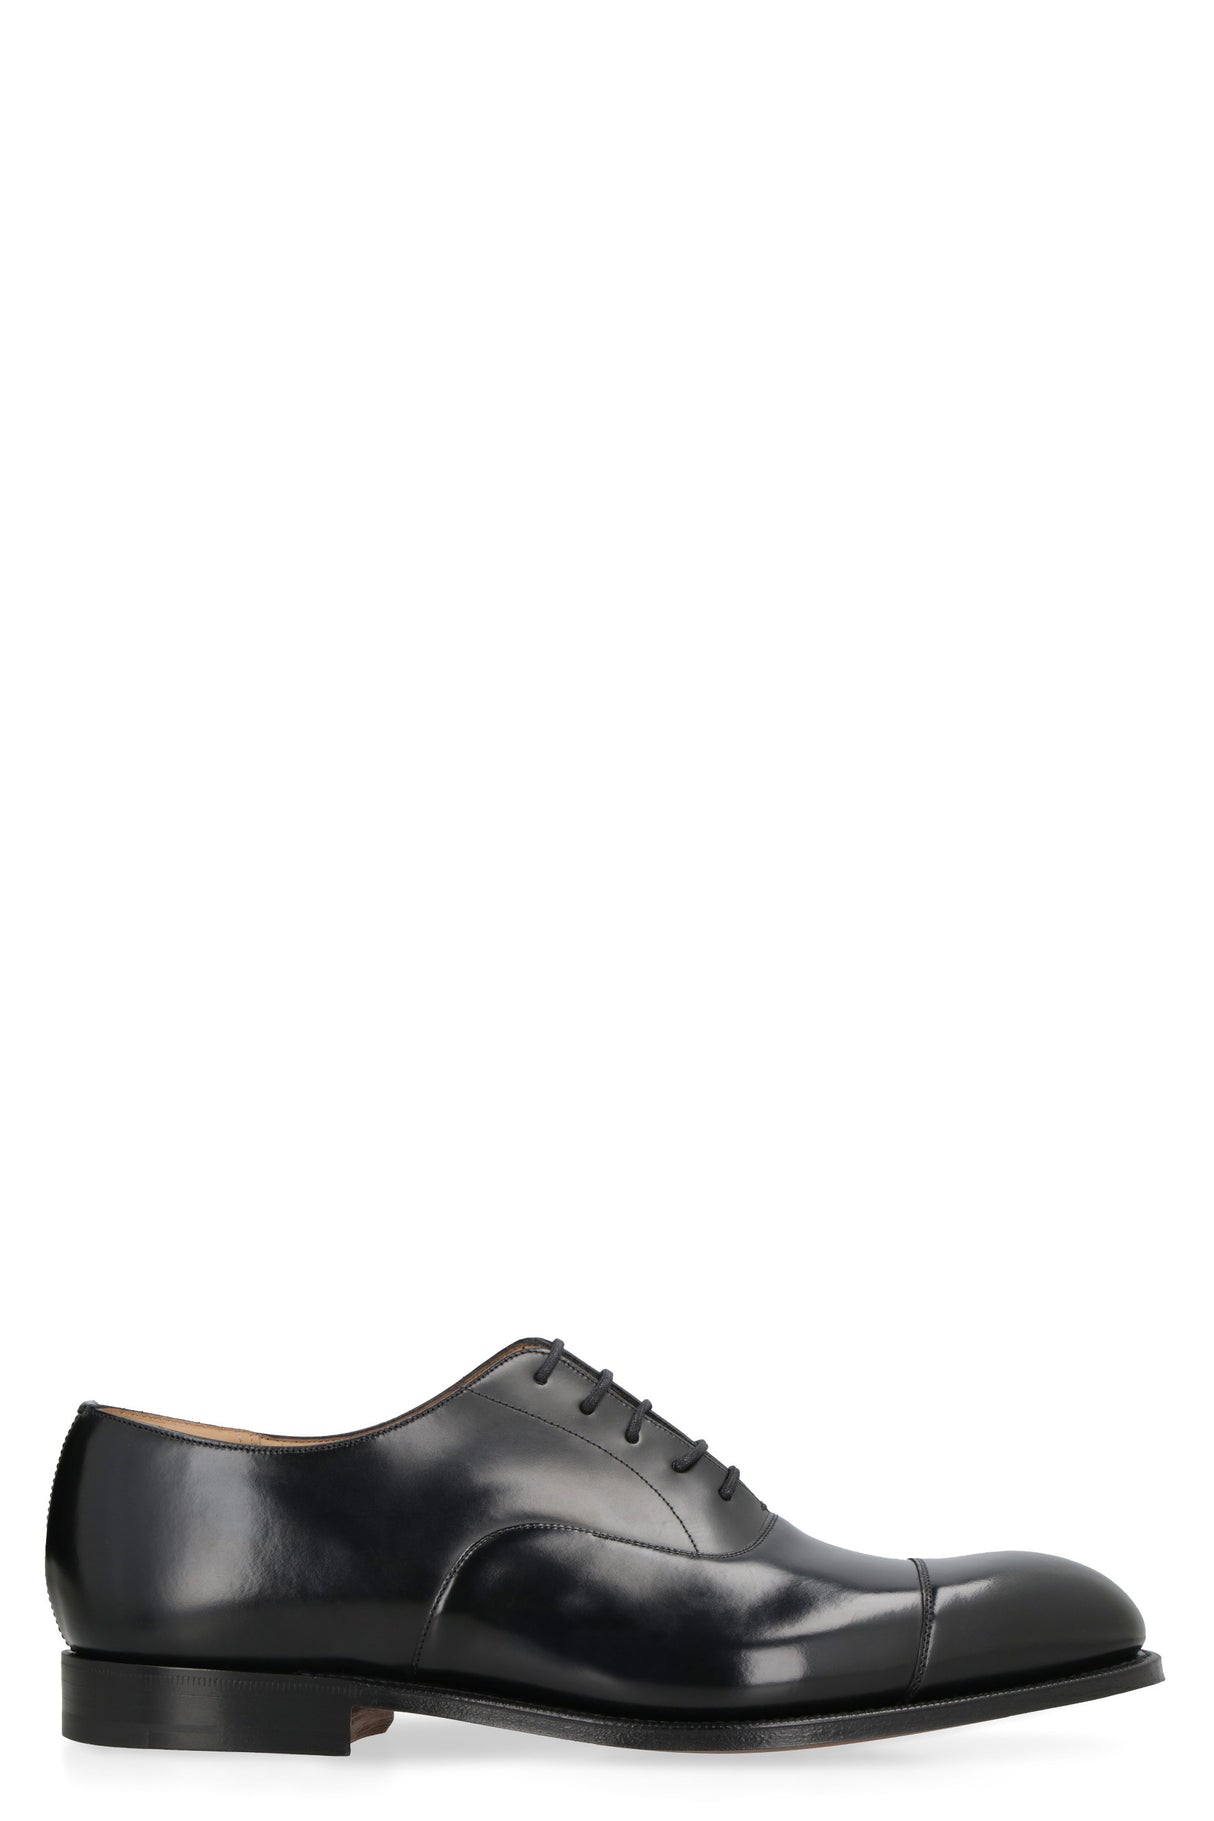 CHURCH'S Classic Black Oxford Shoes for Men in UK Size